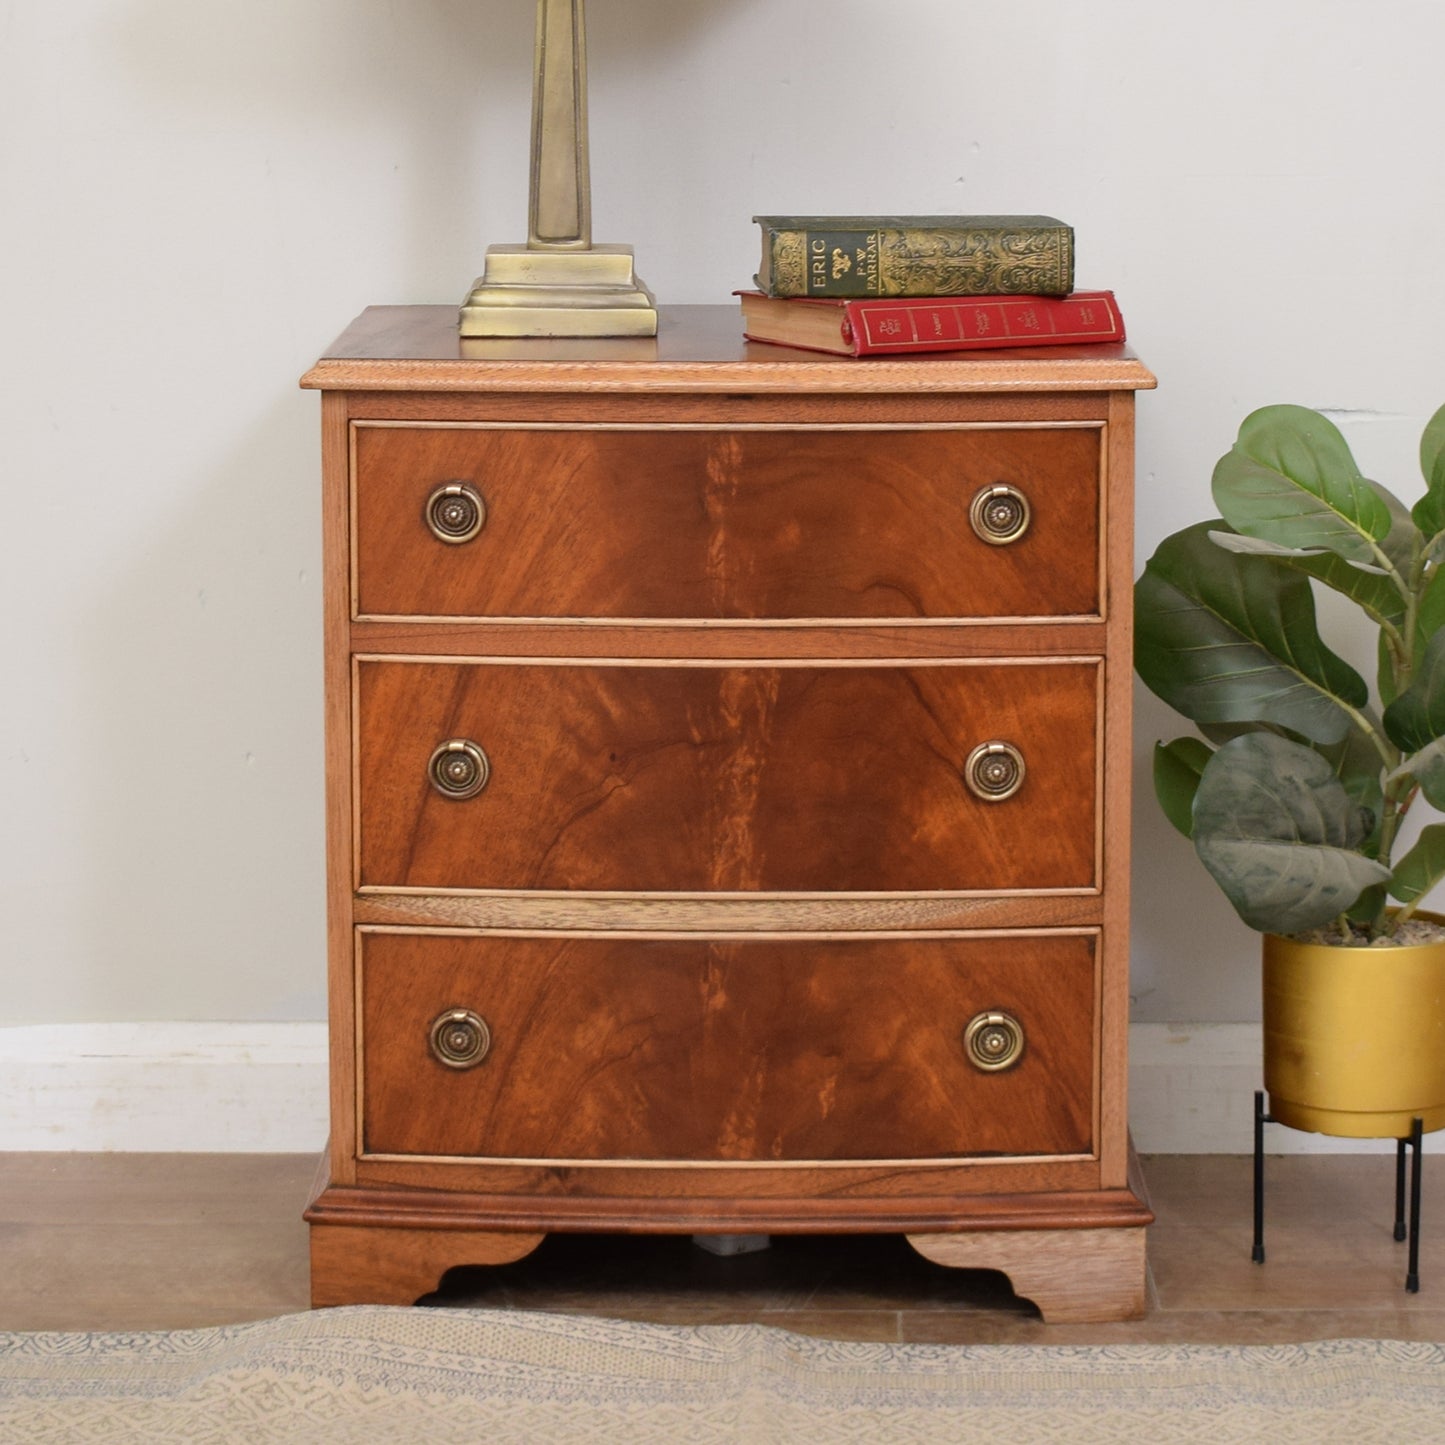 Small Bow-fronted Chest Of Drawers